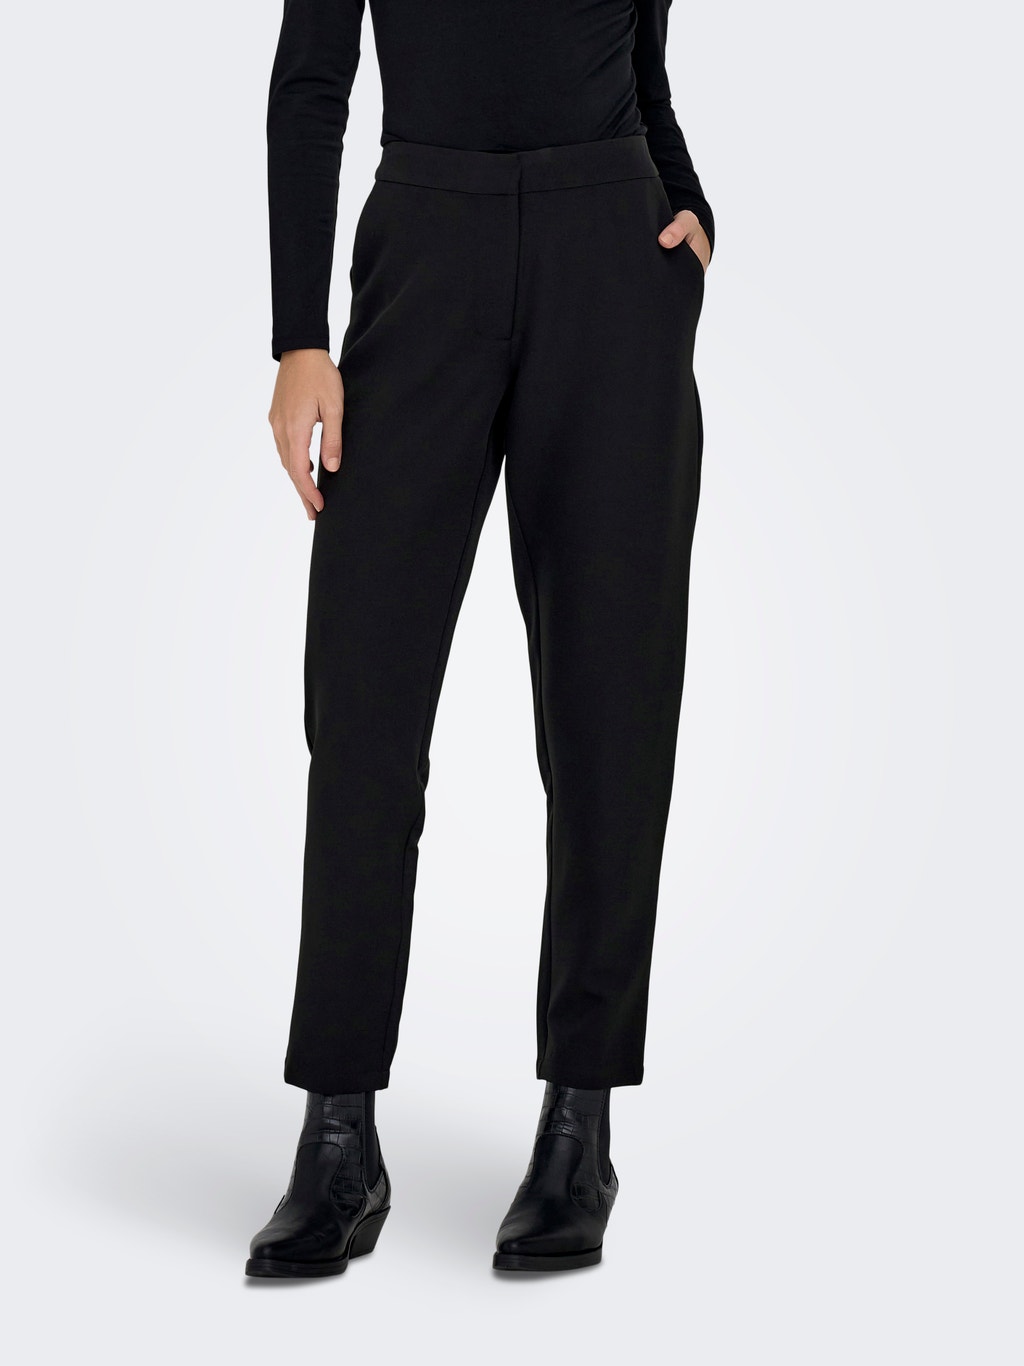 Solid colored Trousers | Black | ONLY®